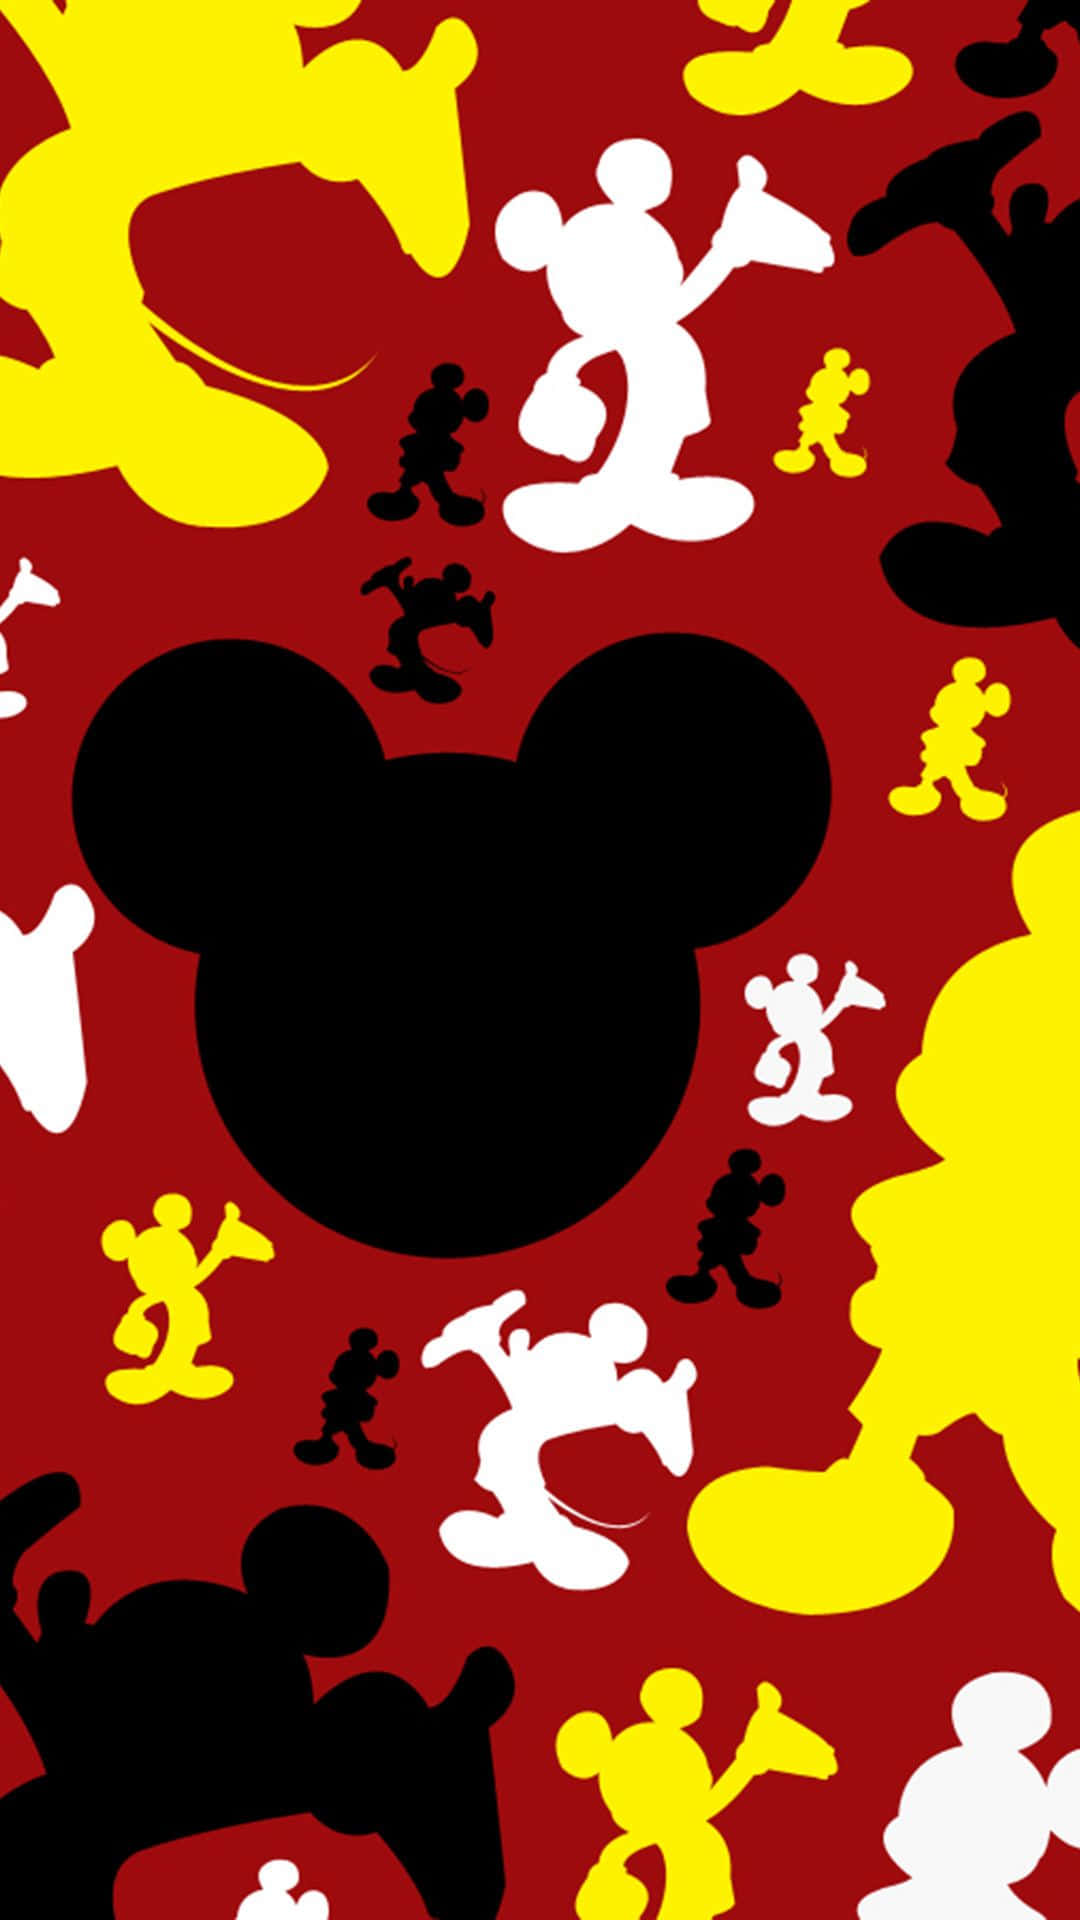 Download • Get in the spirit with Mickey Mouse Ears! Wallpaper